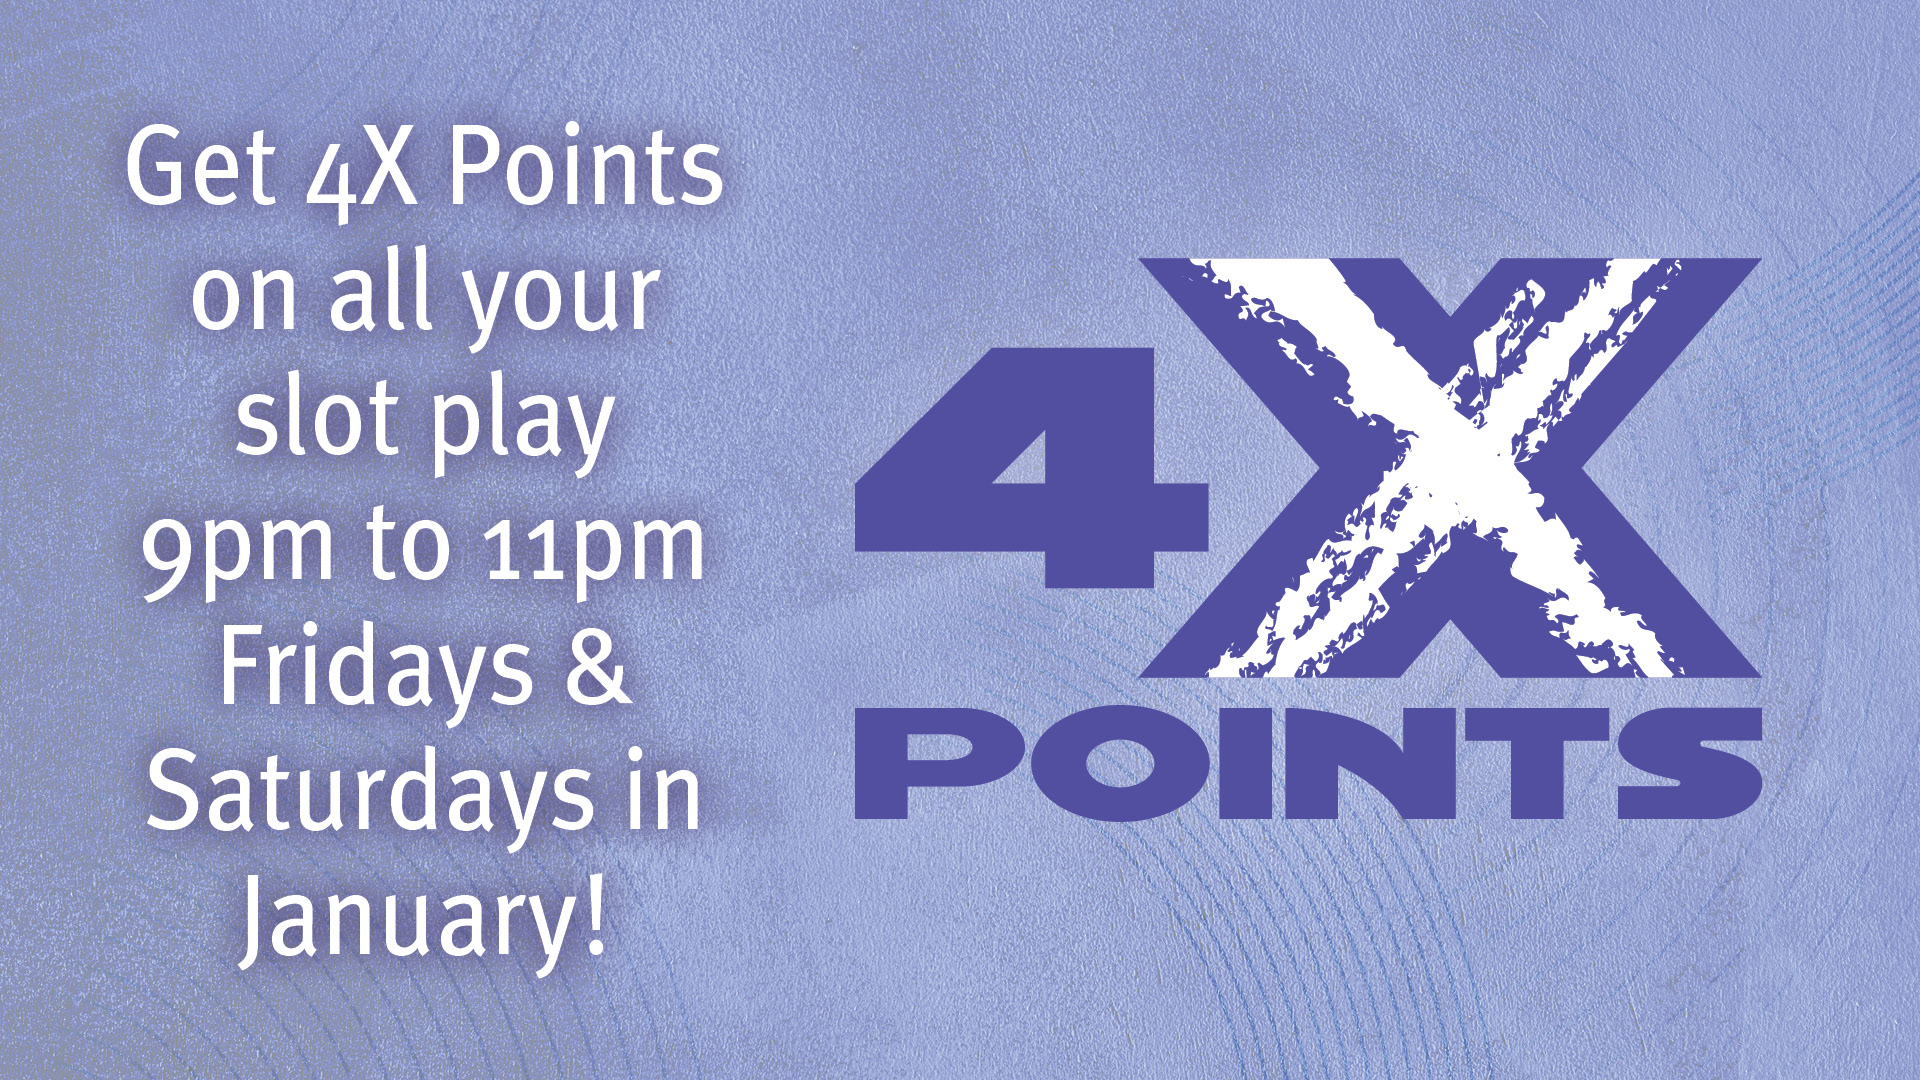 Get 4X Points on all your slot play 9pm to 11pm Fridays & Saturdays in January!